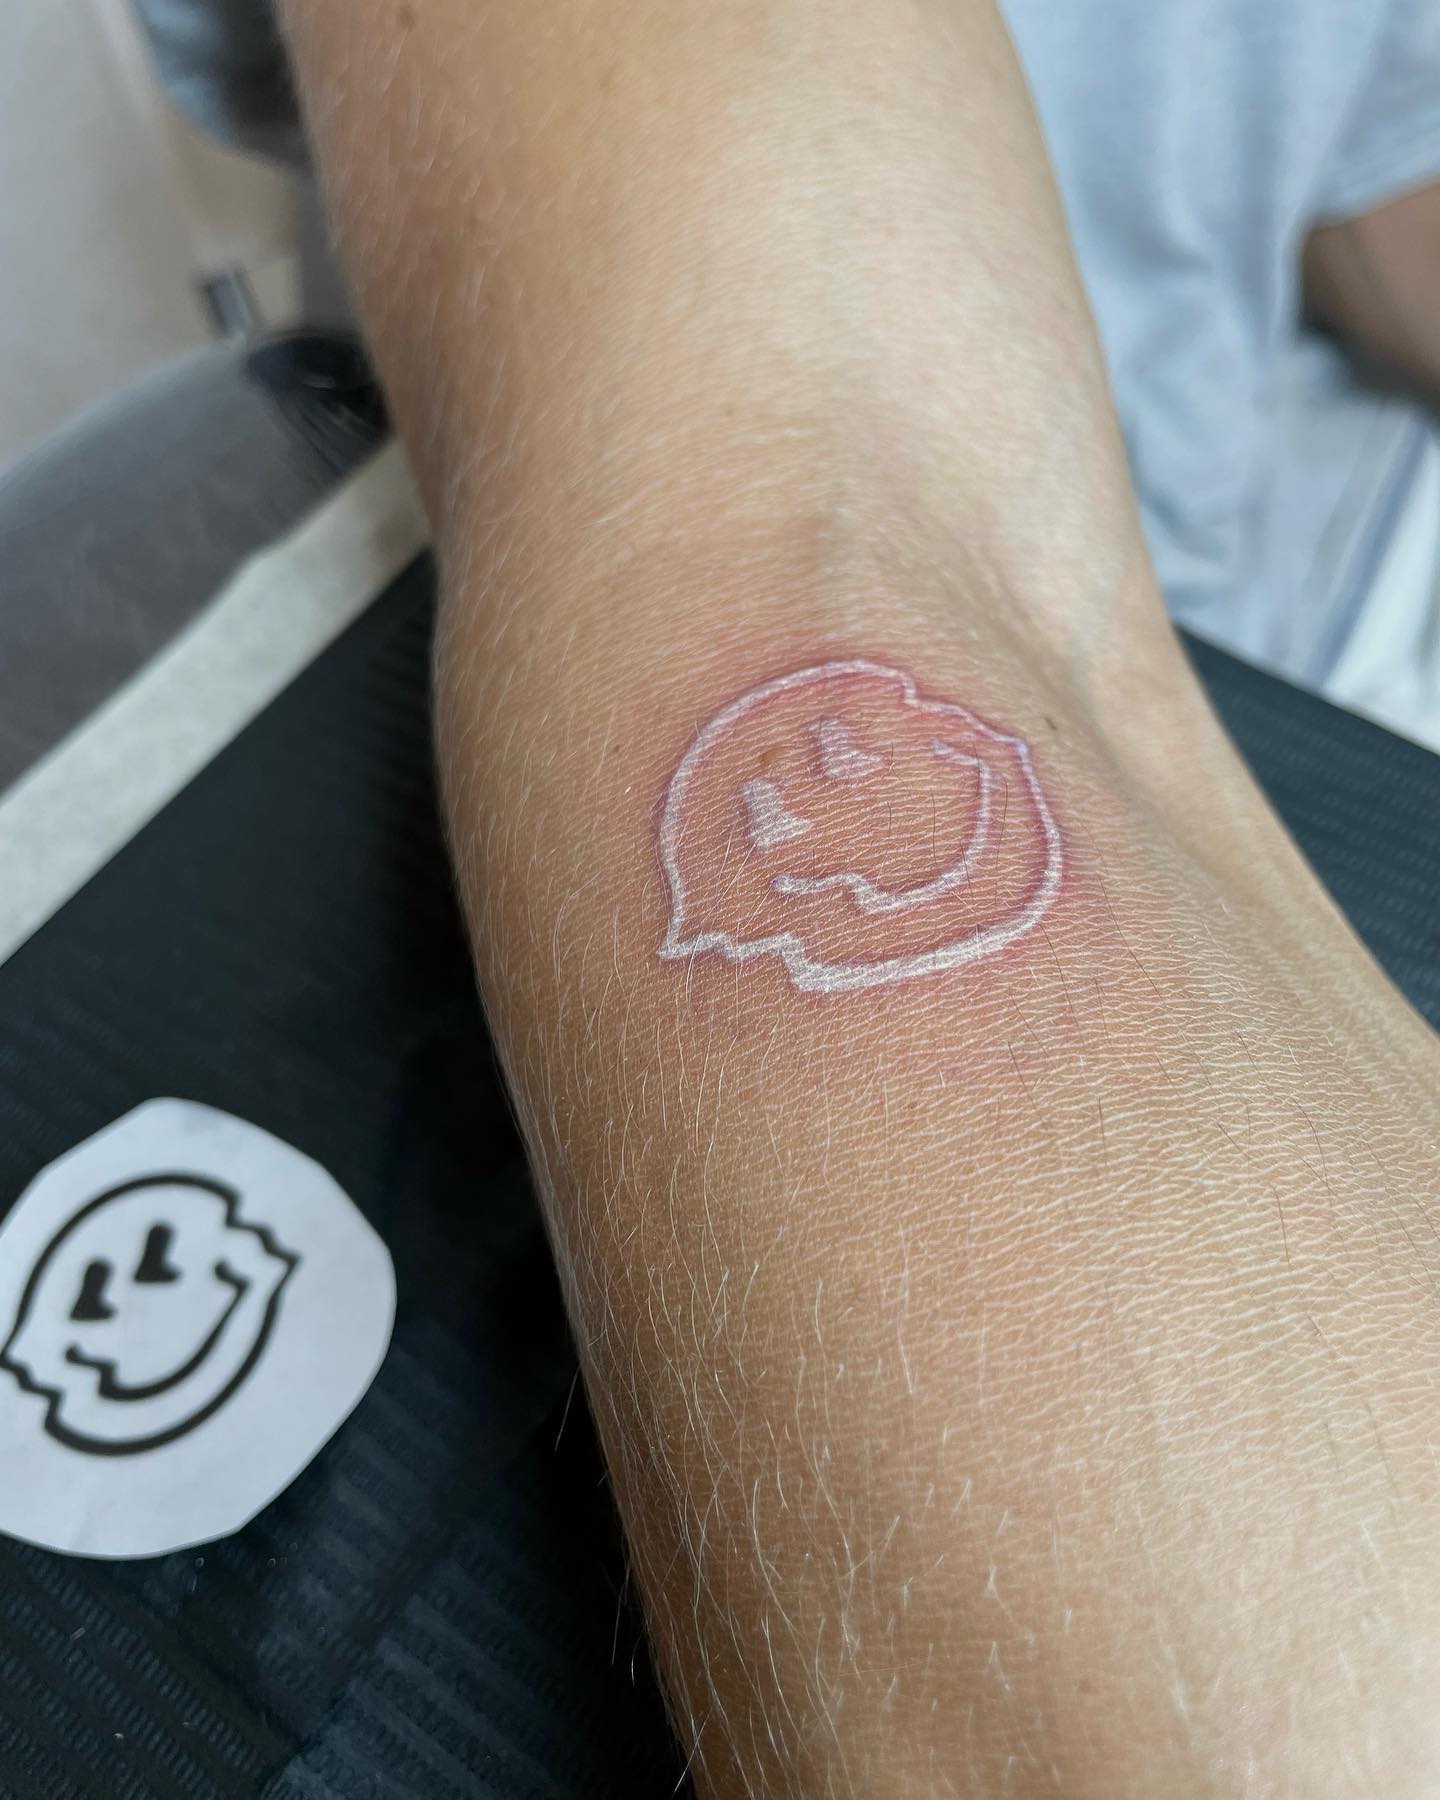 The white ink smiley face tattoo is a great way to express yourself. It's a classic symbol that everyone knows, and it's easy to draw and recognize. You can use it in any way you want, whether it's in conjunction with other tattoos or on its own.